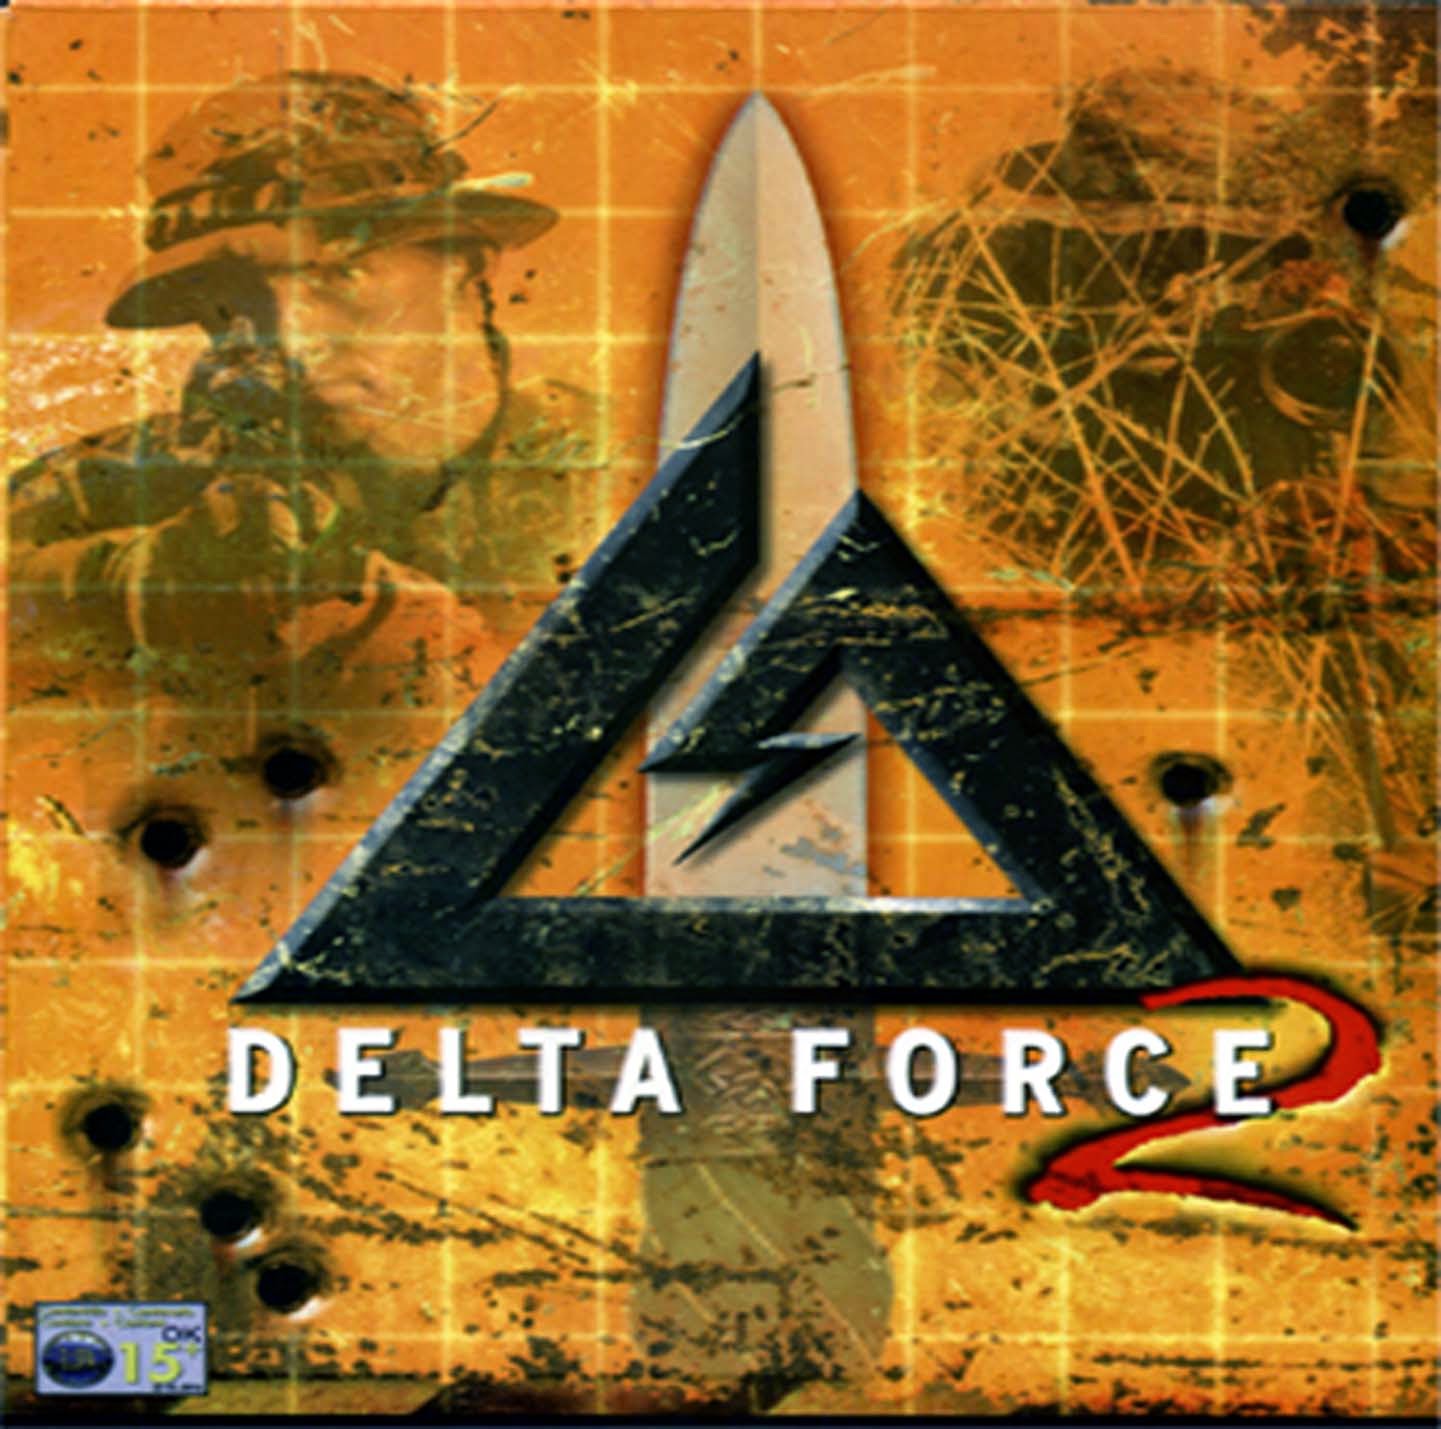 ‎Delta Force - Multiplayer Game on the App Store